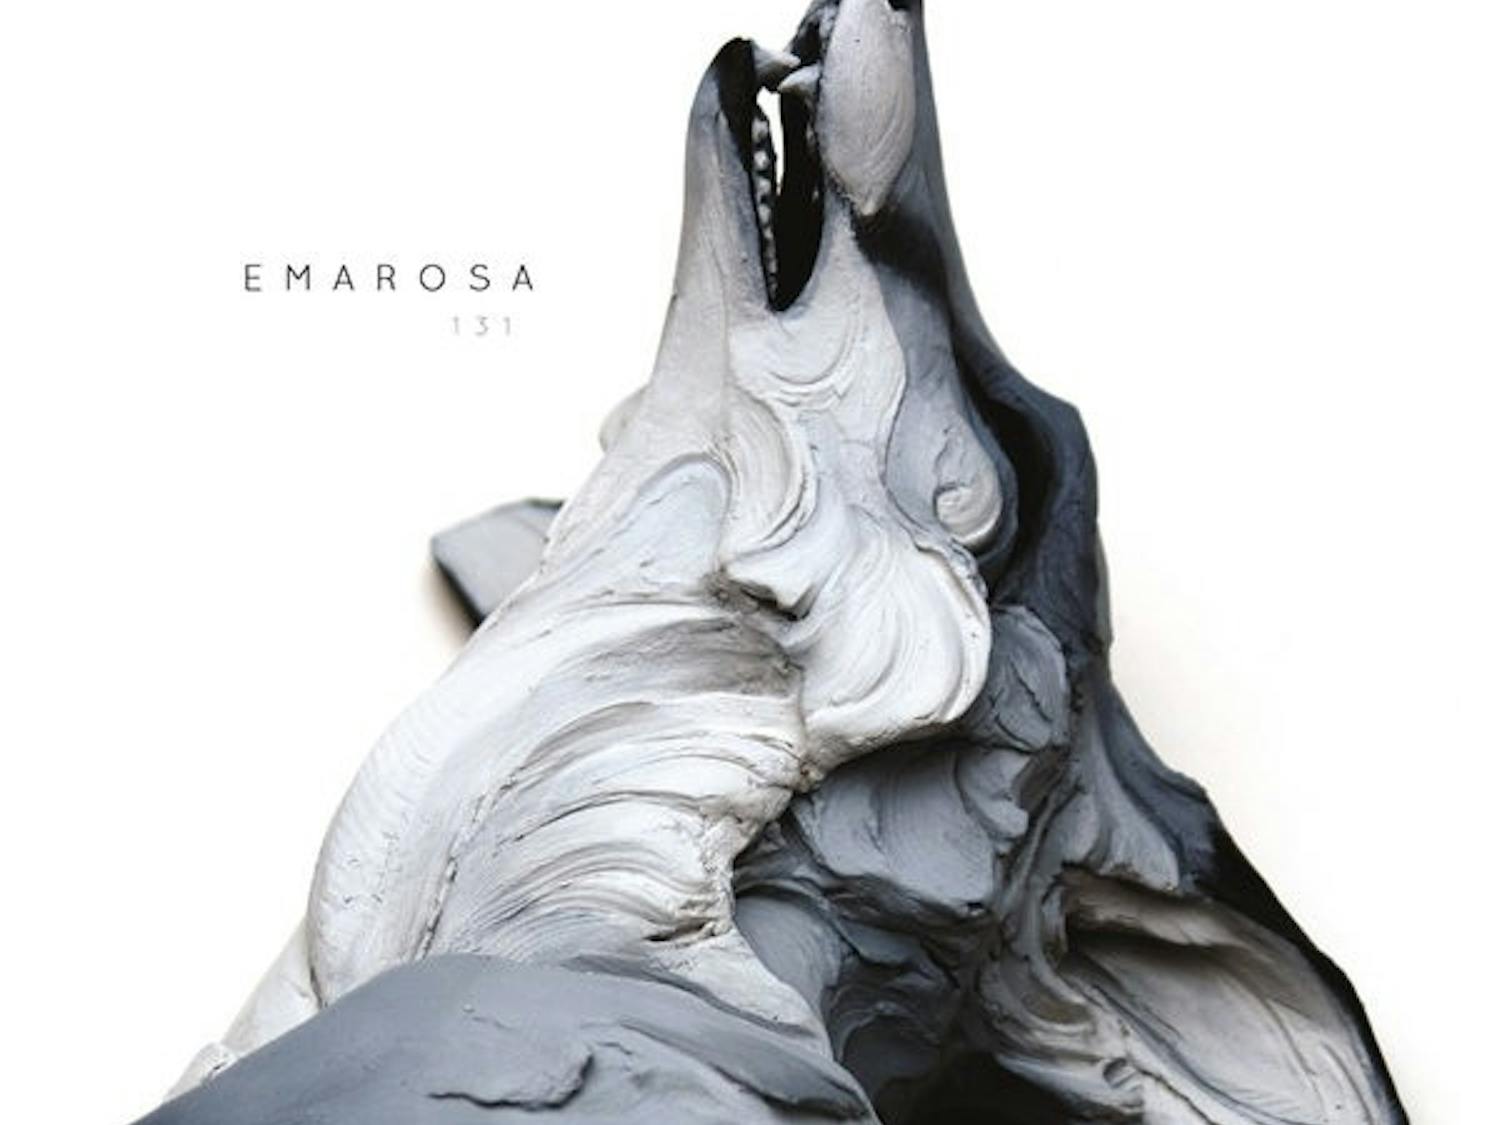 Emarosa's fourth album, "131," shows that despite many member changes, the group was able to produce its strongest album yet.